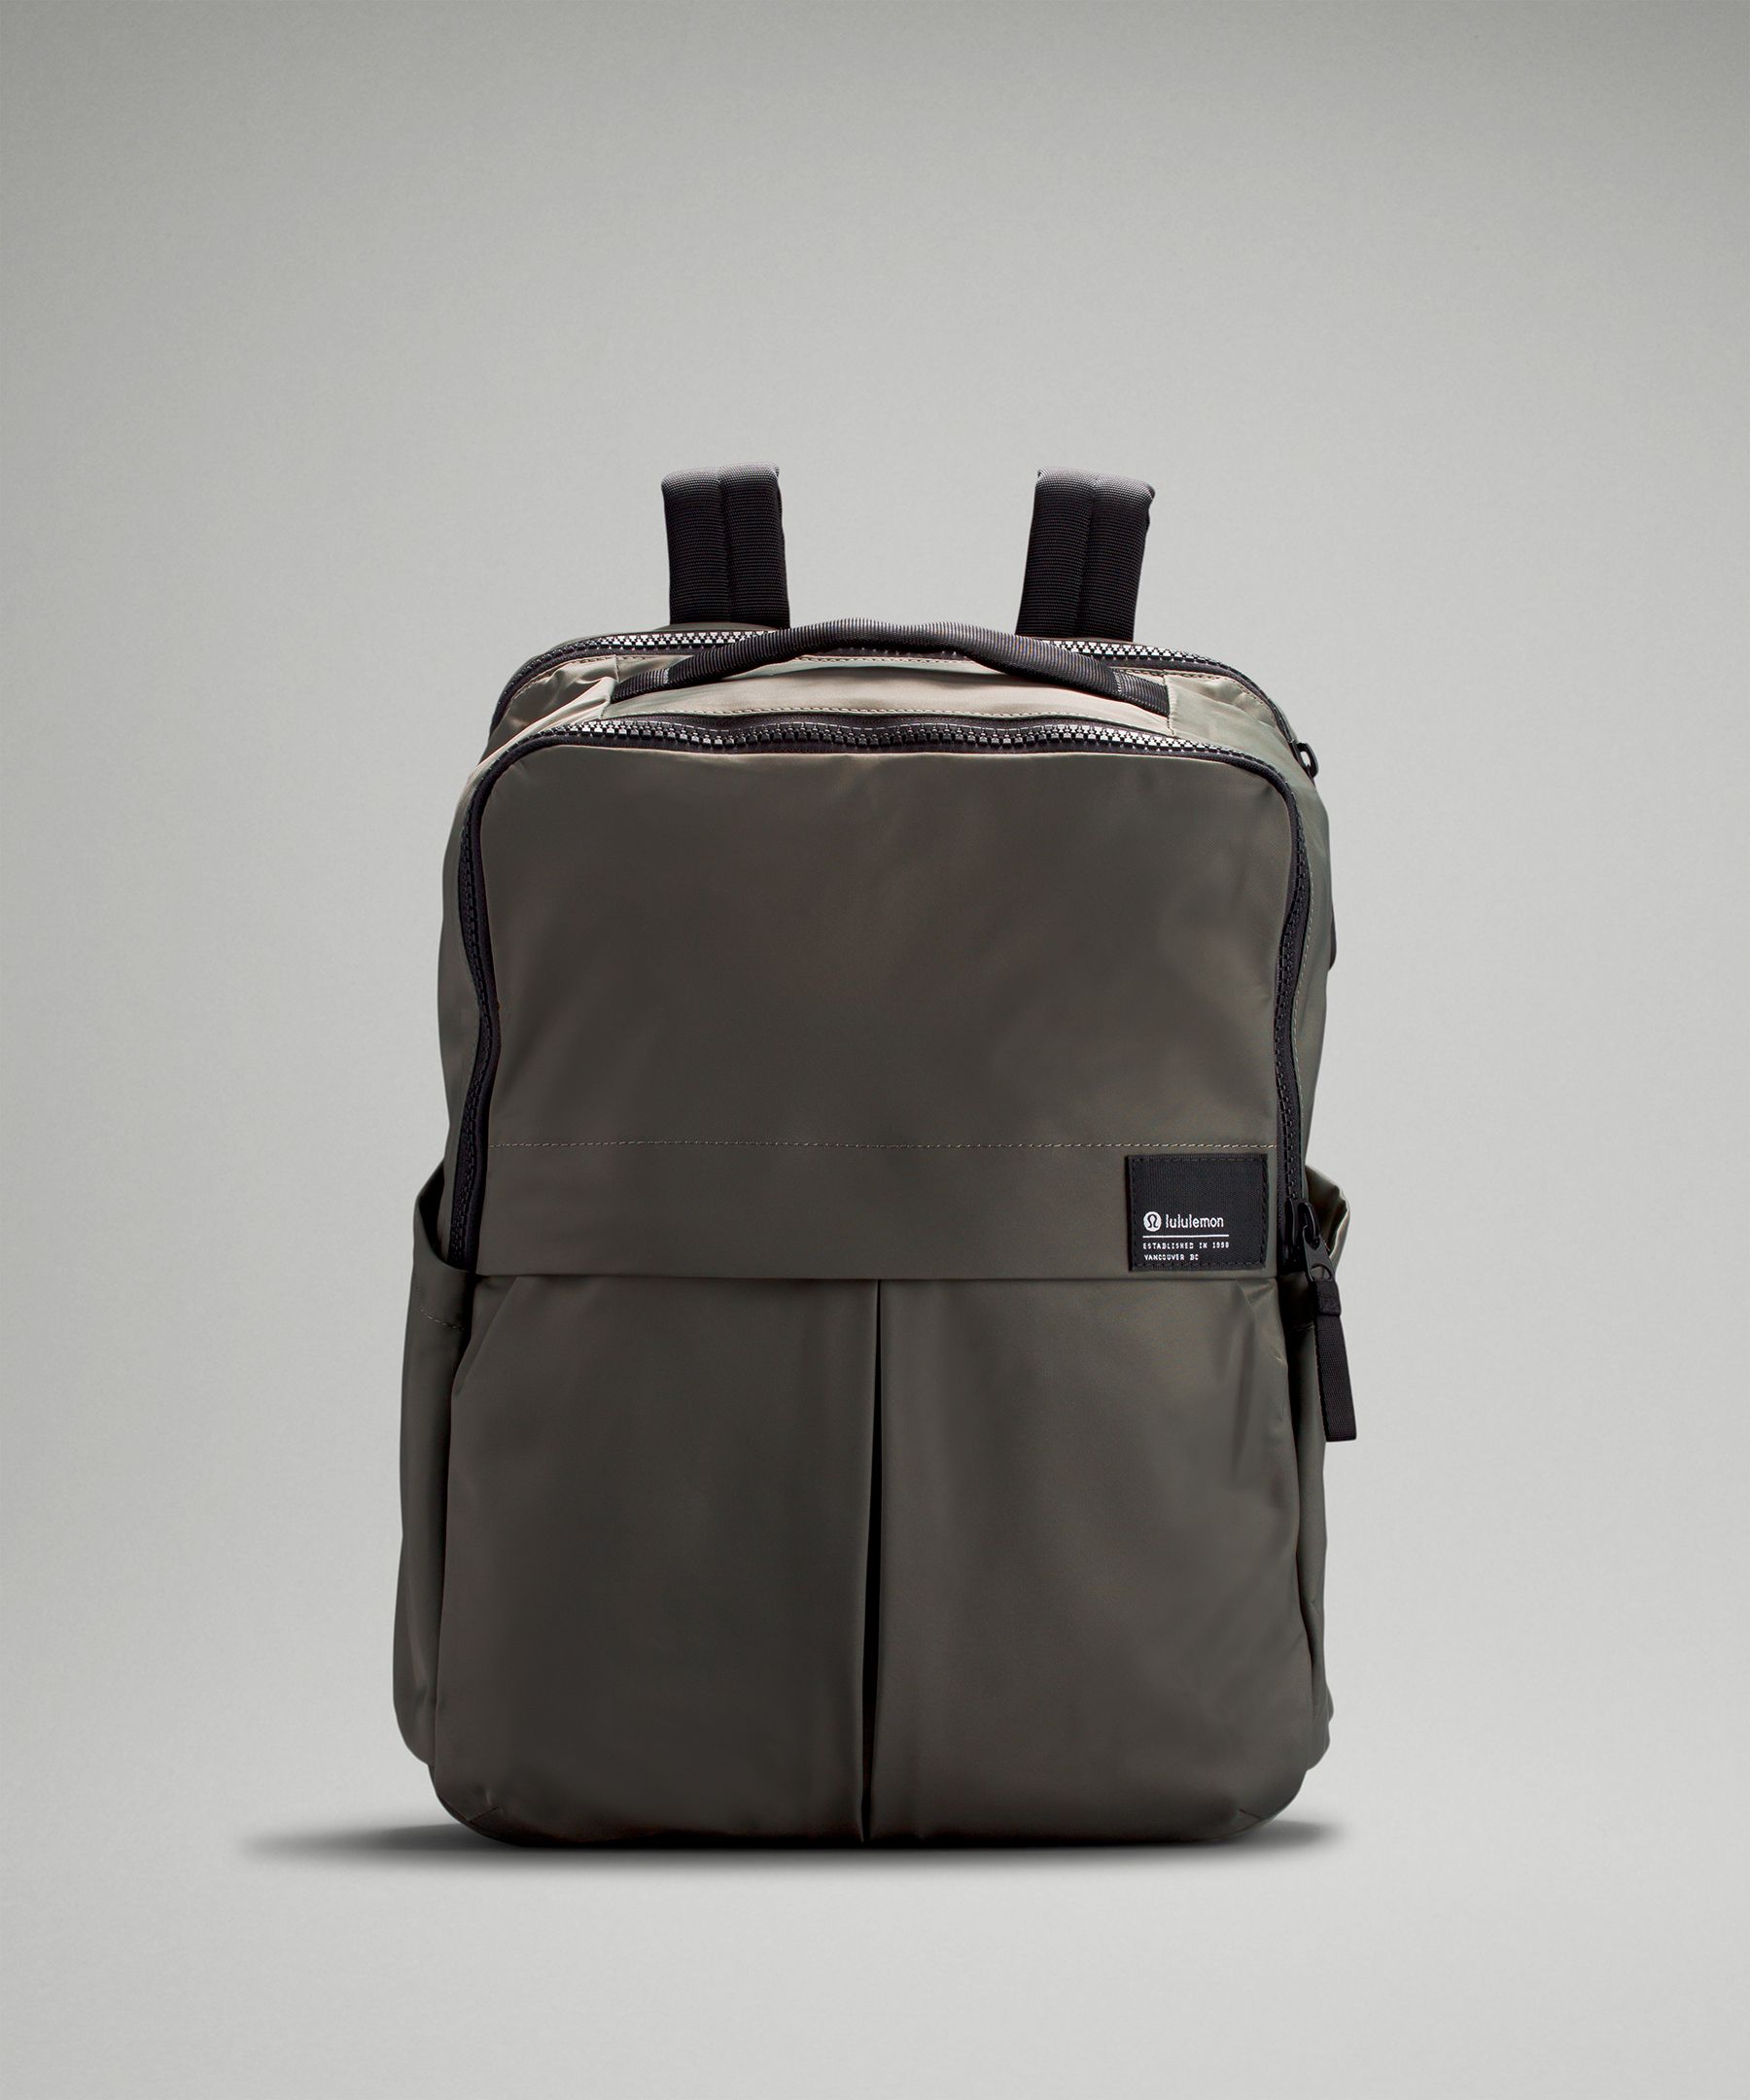 lululemon Everyday Backpack 2.0 23L Review